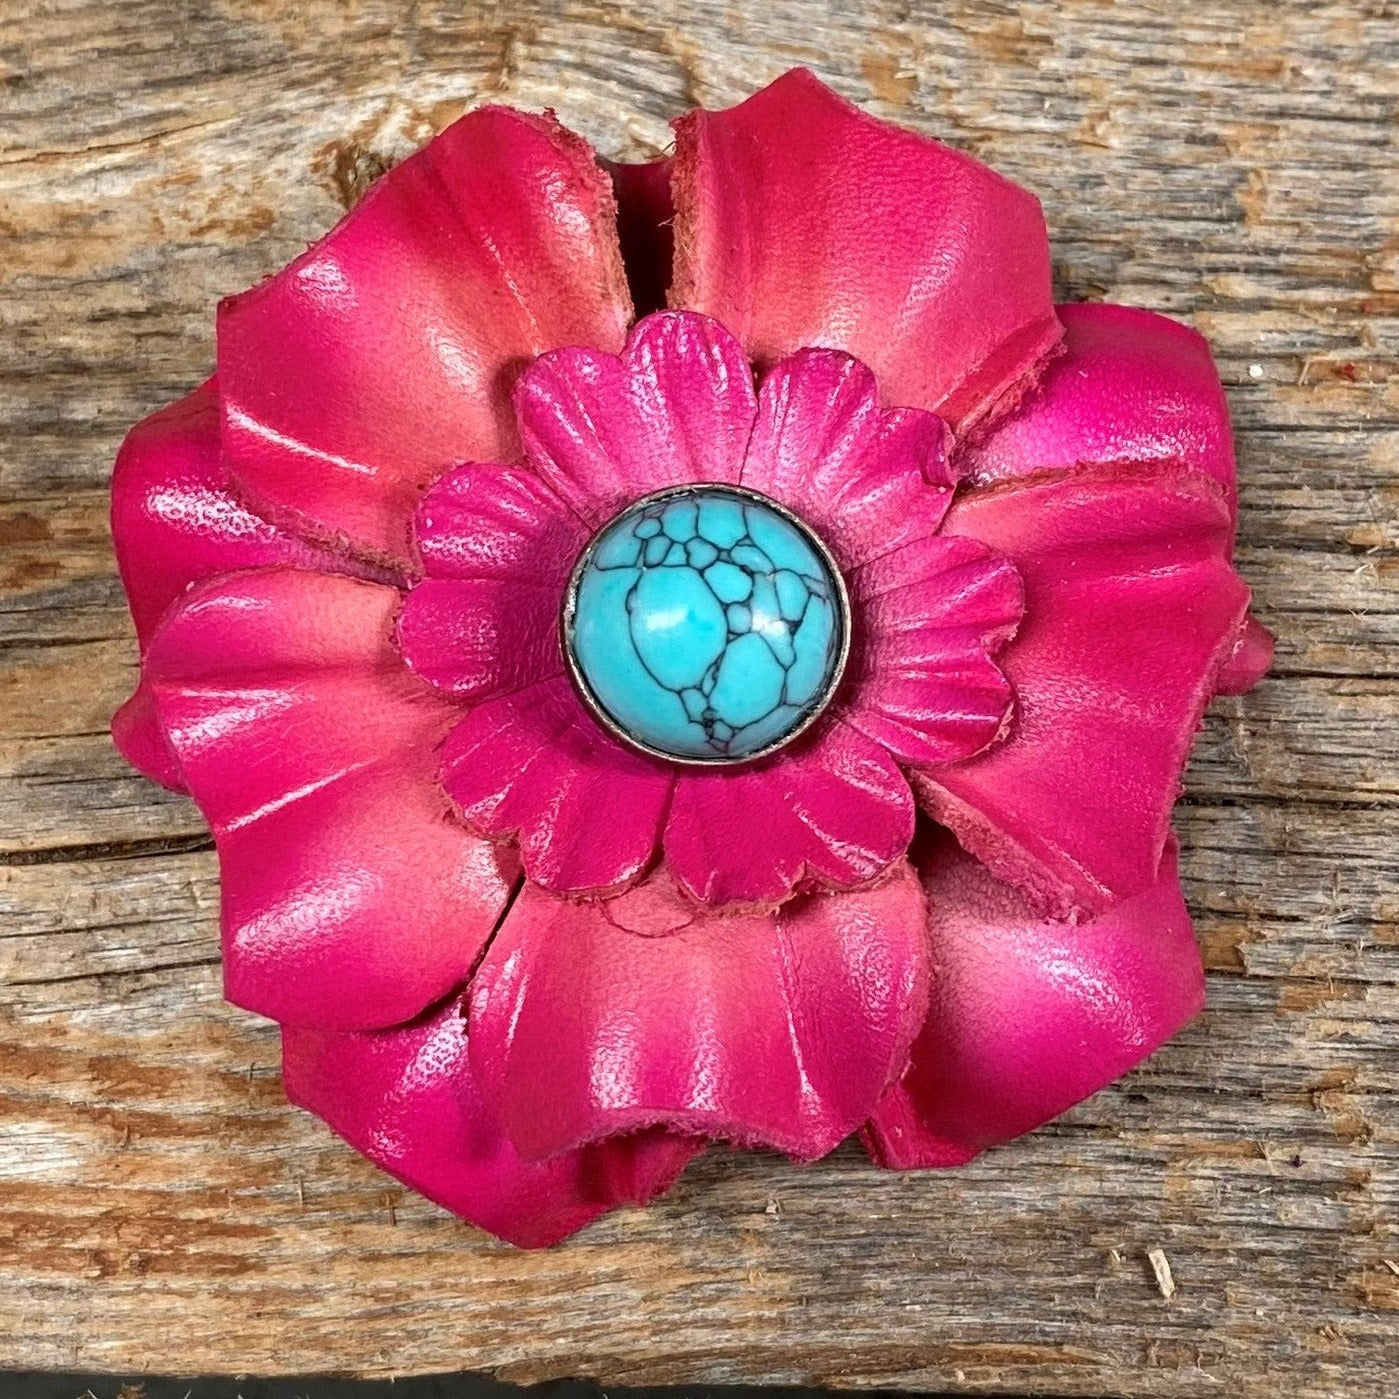 Hot Pink Carnation Flower With Round Turquoise Cabochon